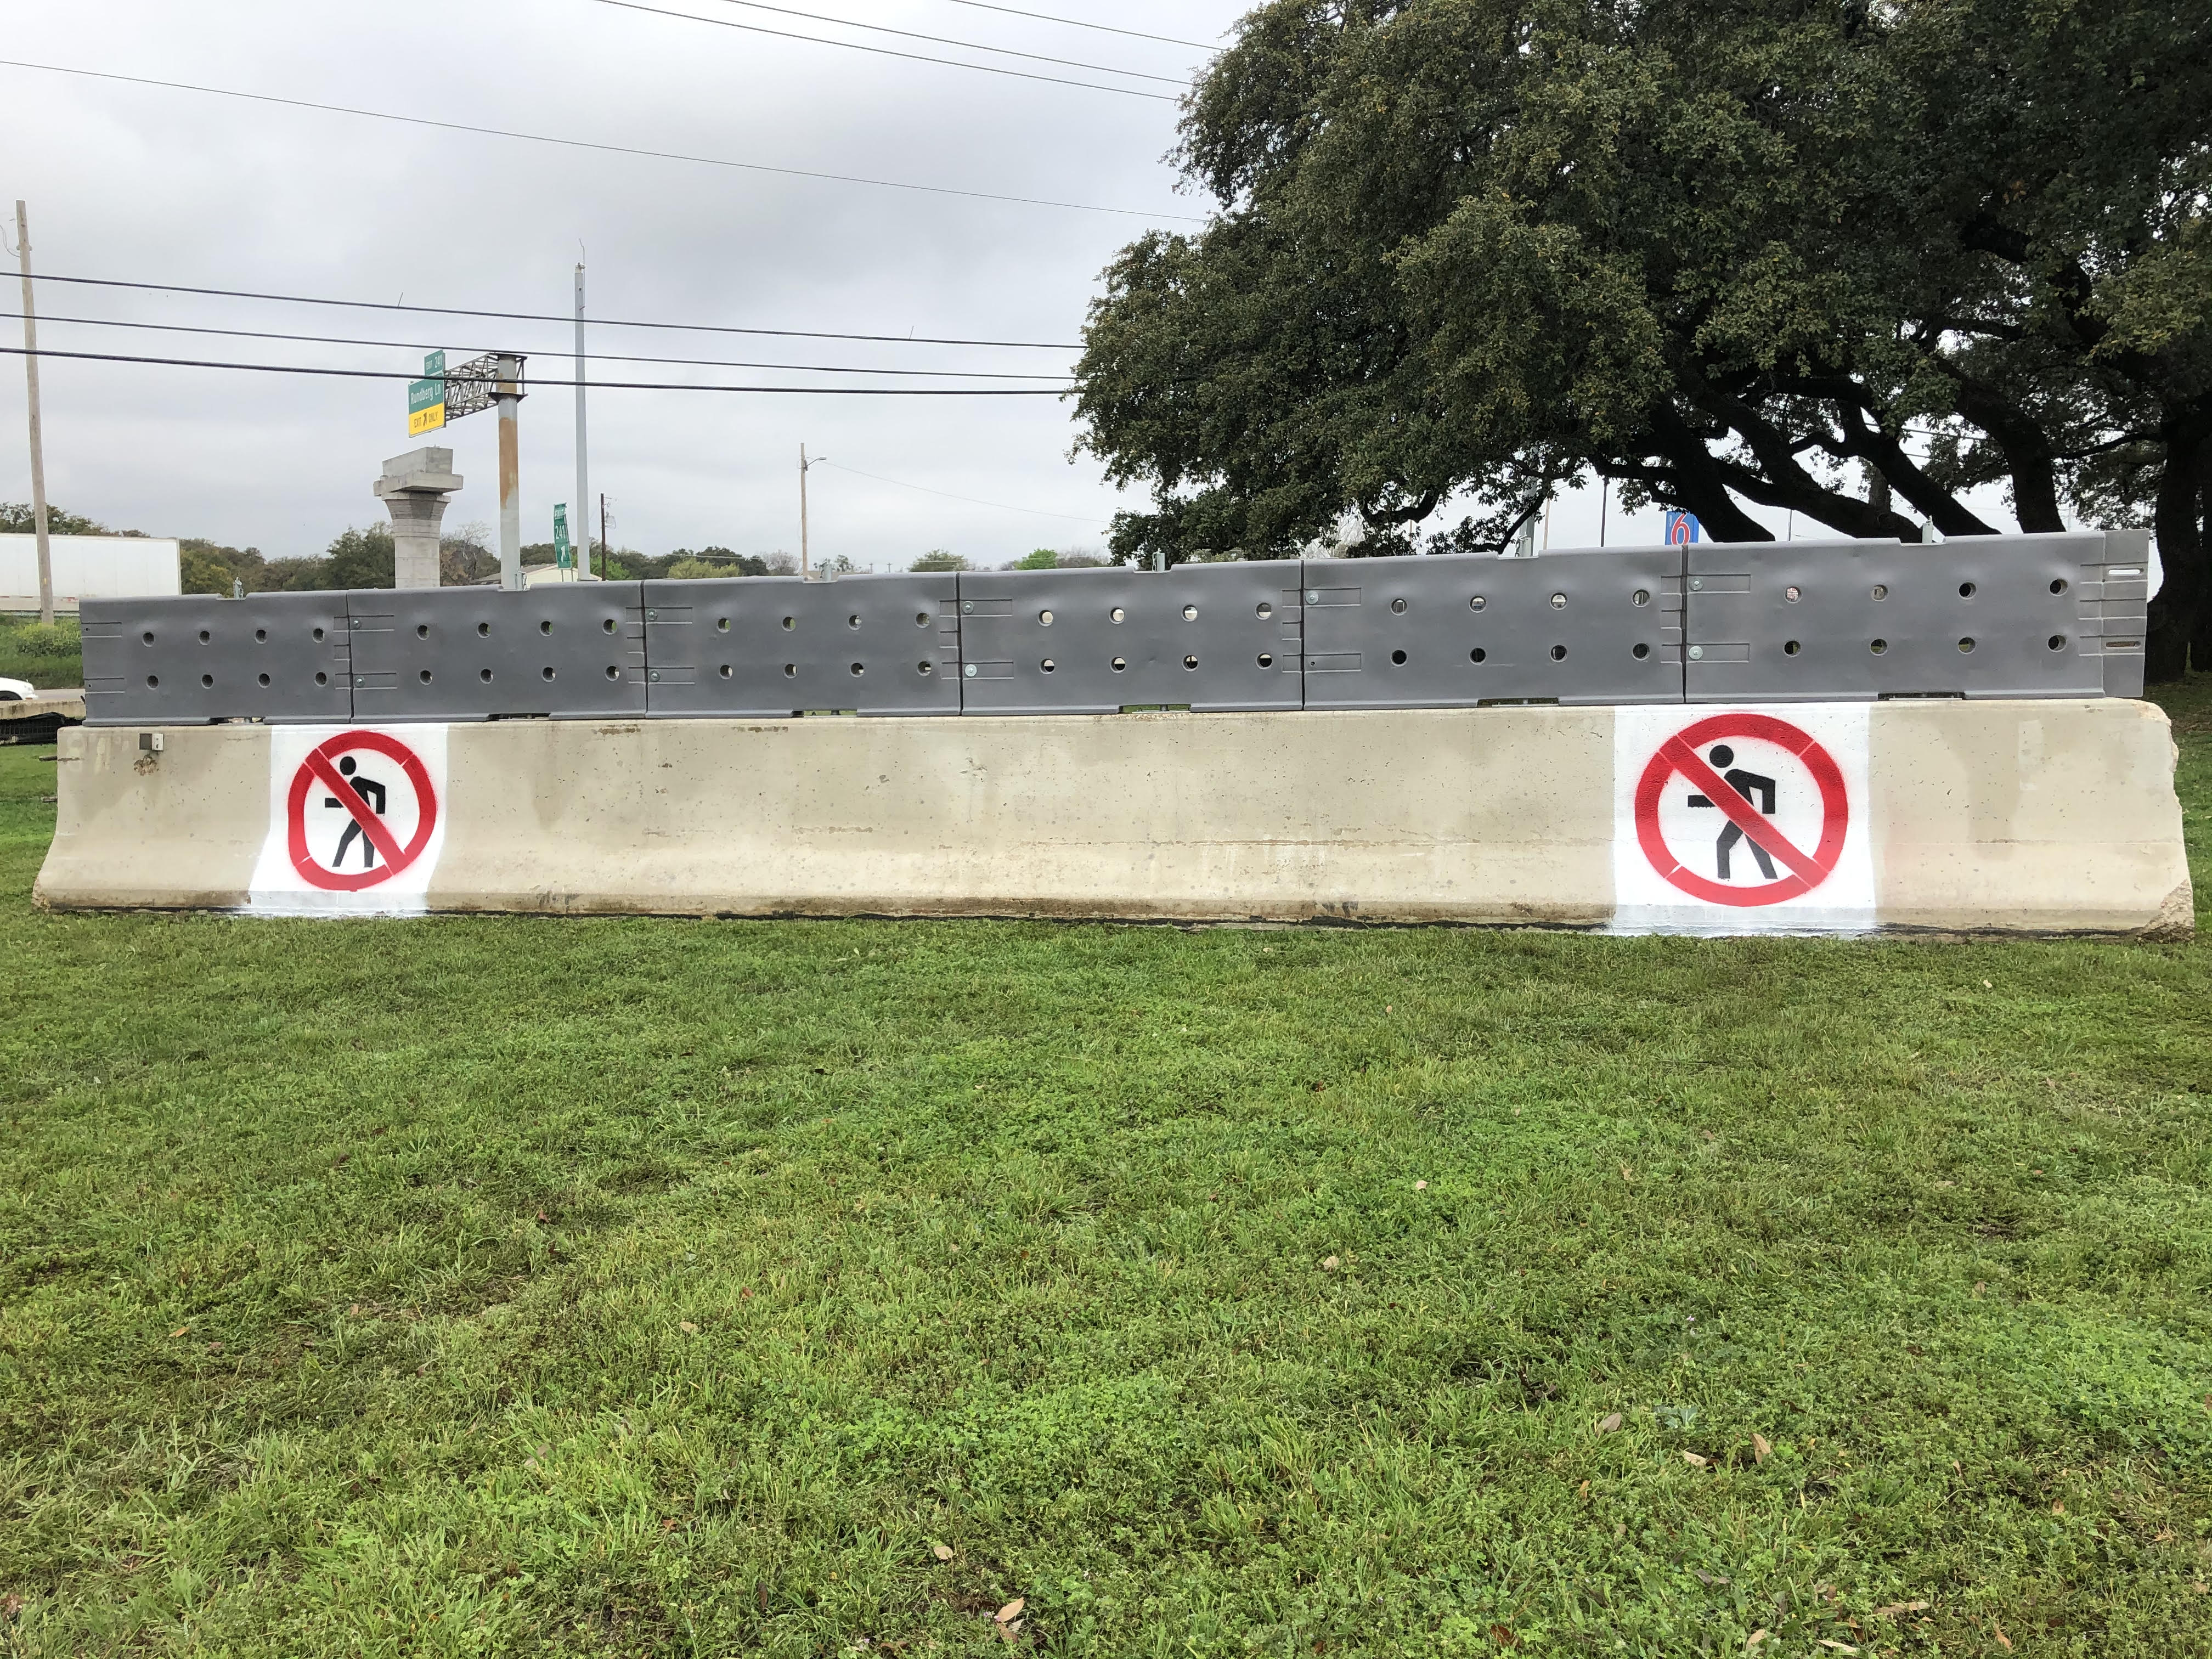 The Texas Department of Transportation on March 10 revealed new barriers to be installed along I-35 designed to deter pedestrians from attempting to cross the interstate highway.